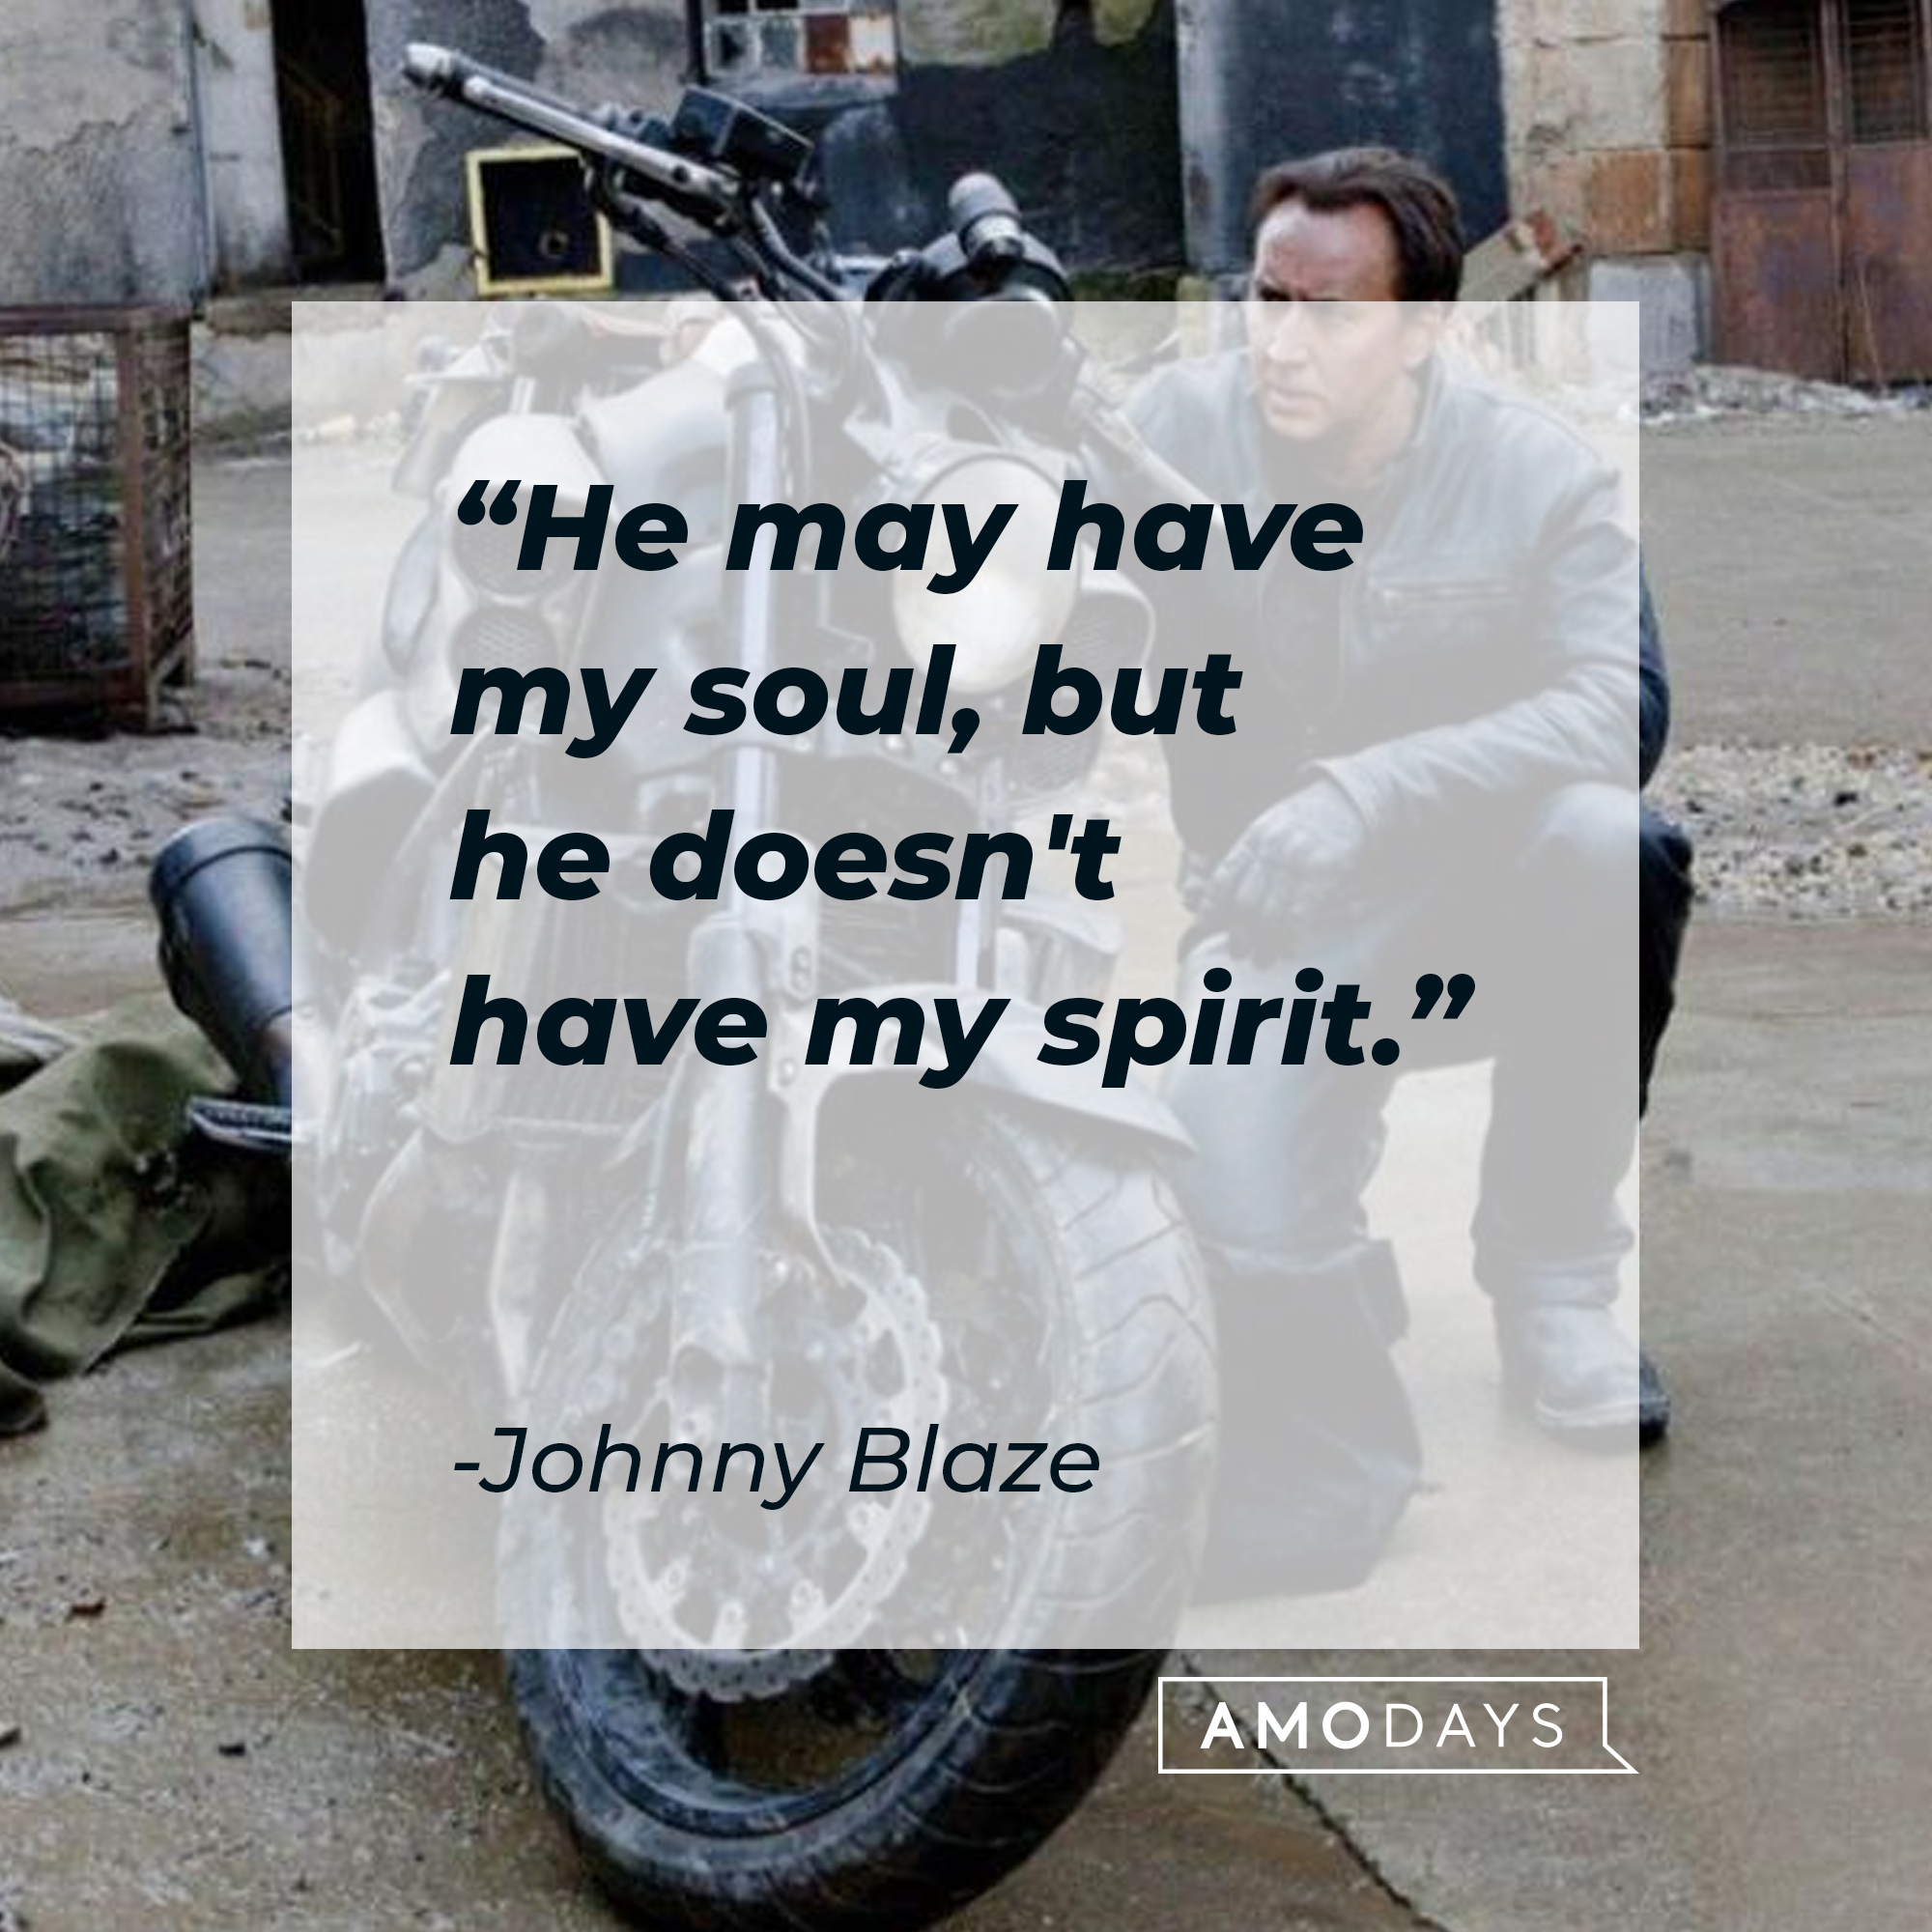 Johnny Blaze's quote: "He may have my soul, but he doesn't have my spirit." | Source: facebook.com/ghostridermovie